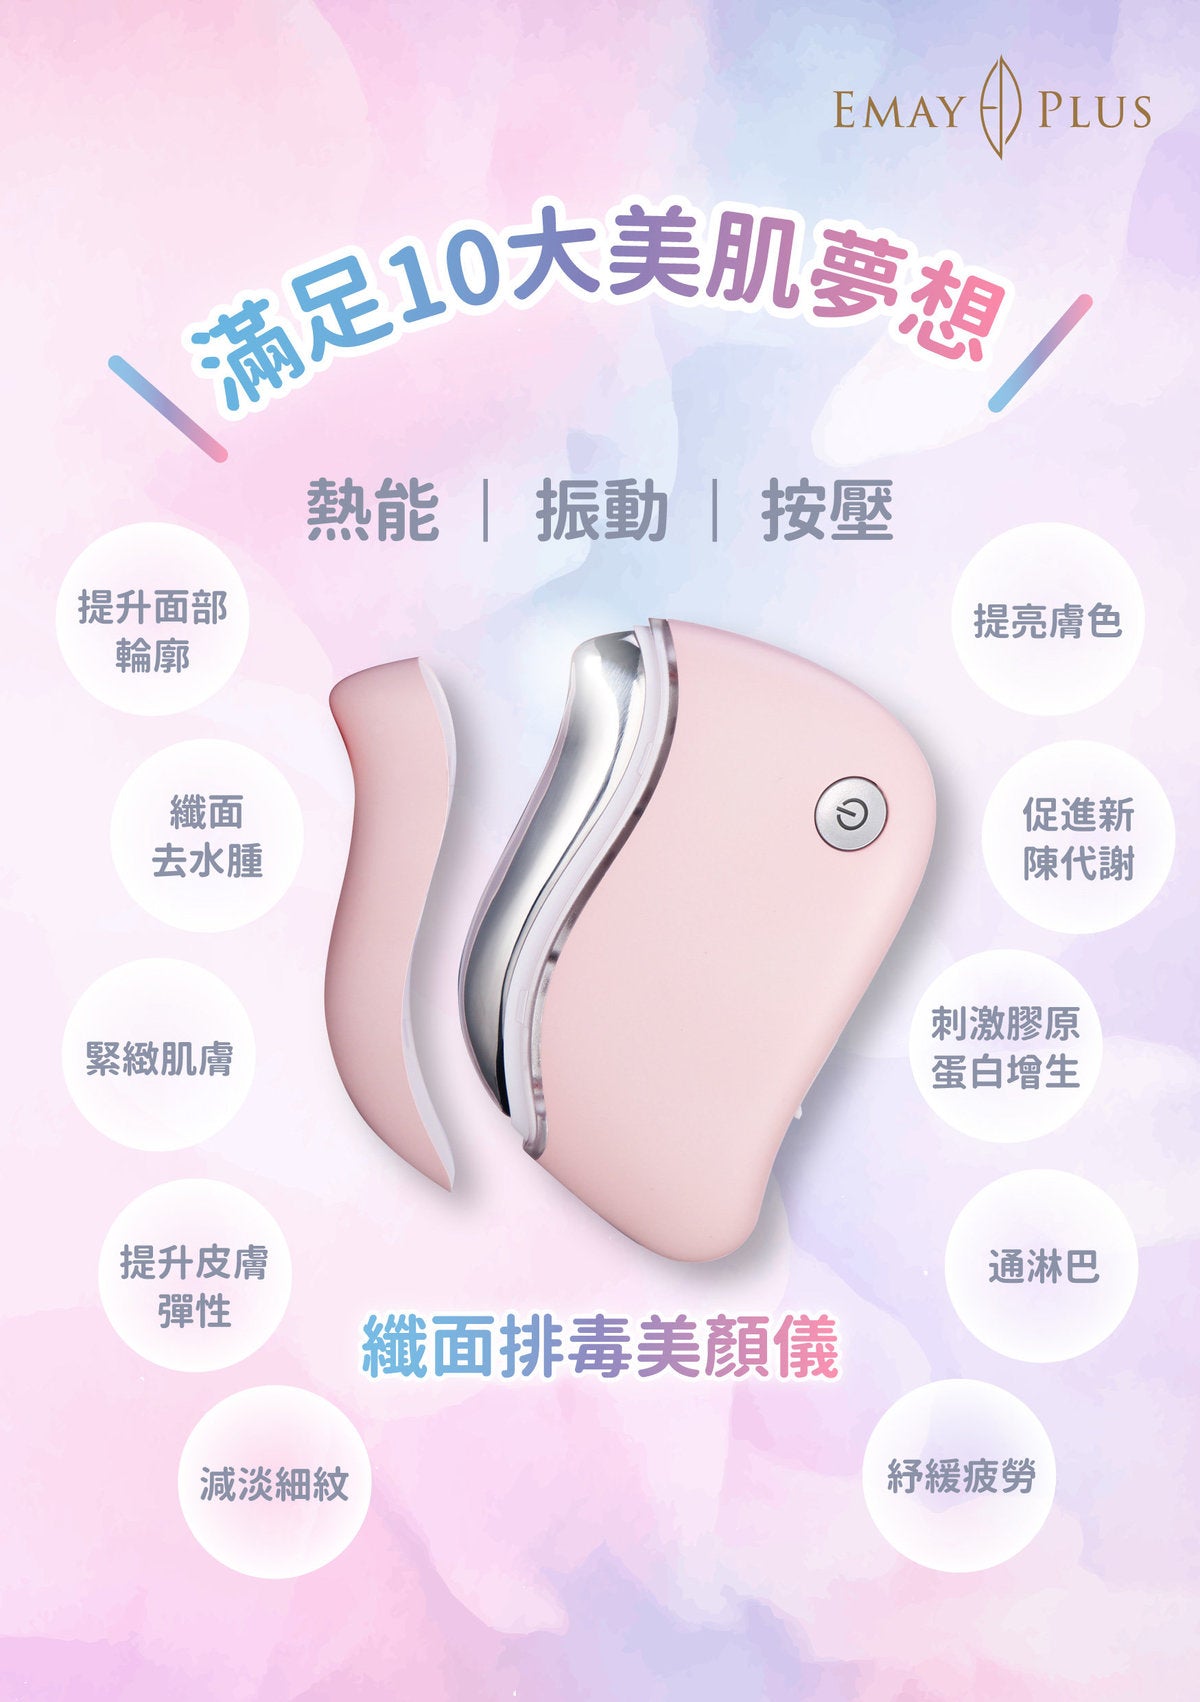 Emay Plus - Slimming, Detoxifying and Beauty Device EP-406｜V Face Bird｜Detoxification｜Lymphatic relief｜Reduce fine lines｜Facial Massage - Pink 